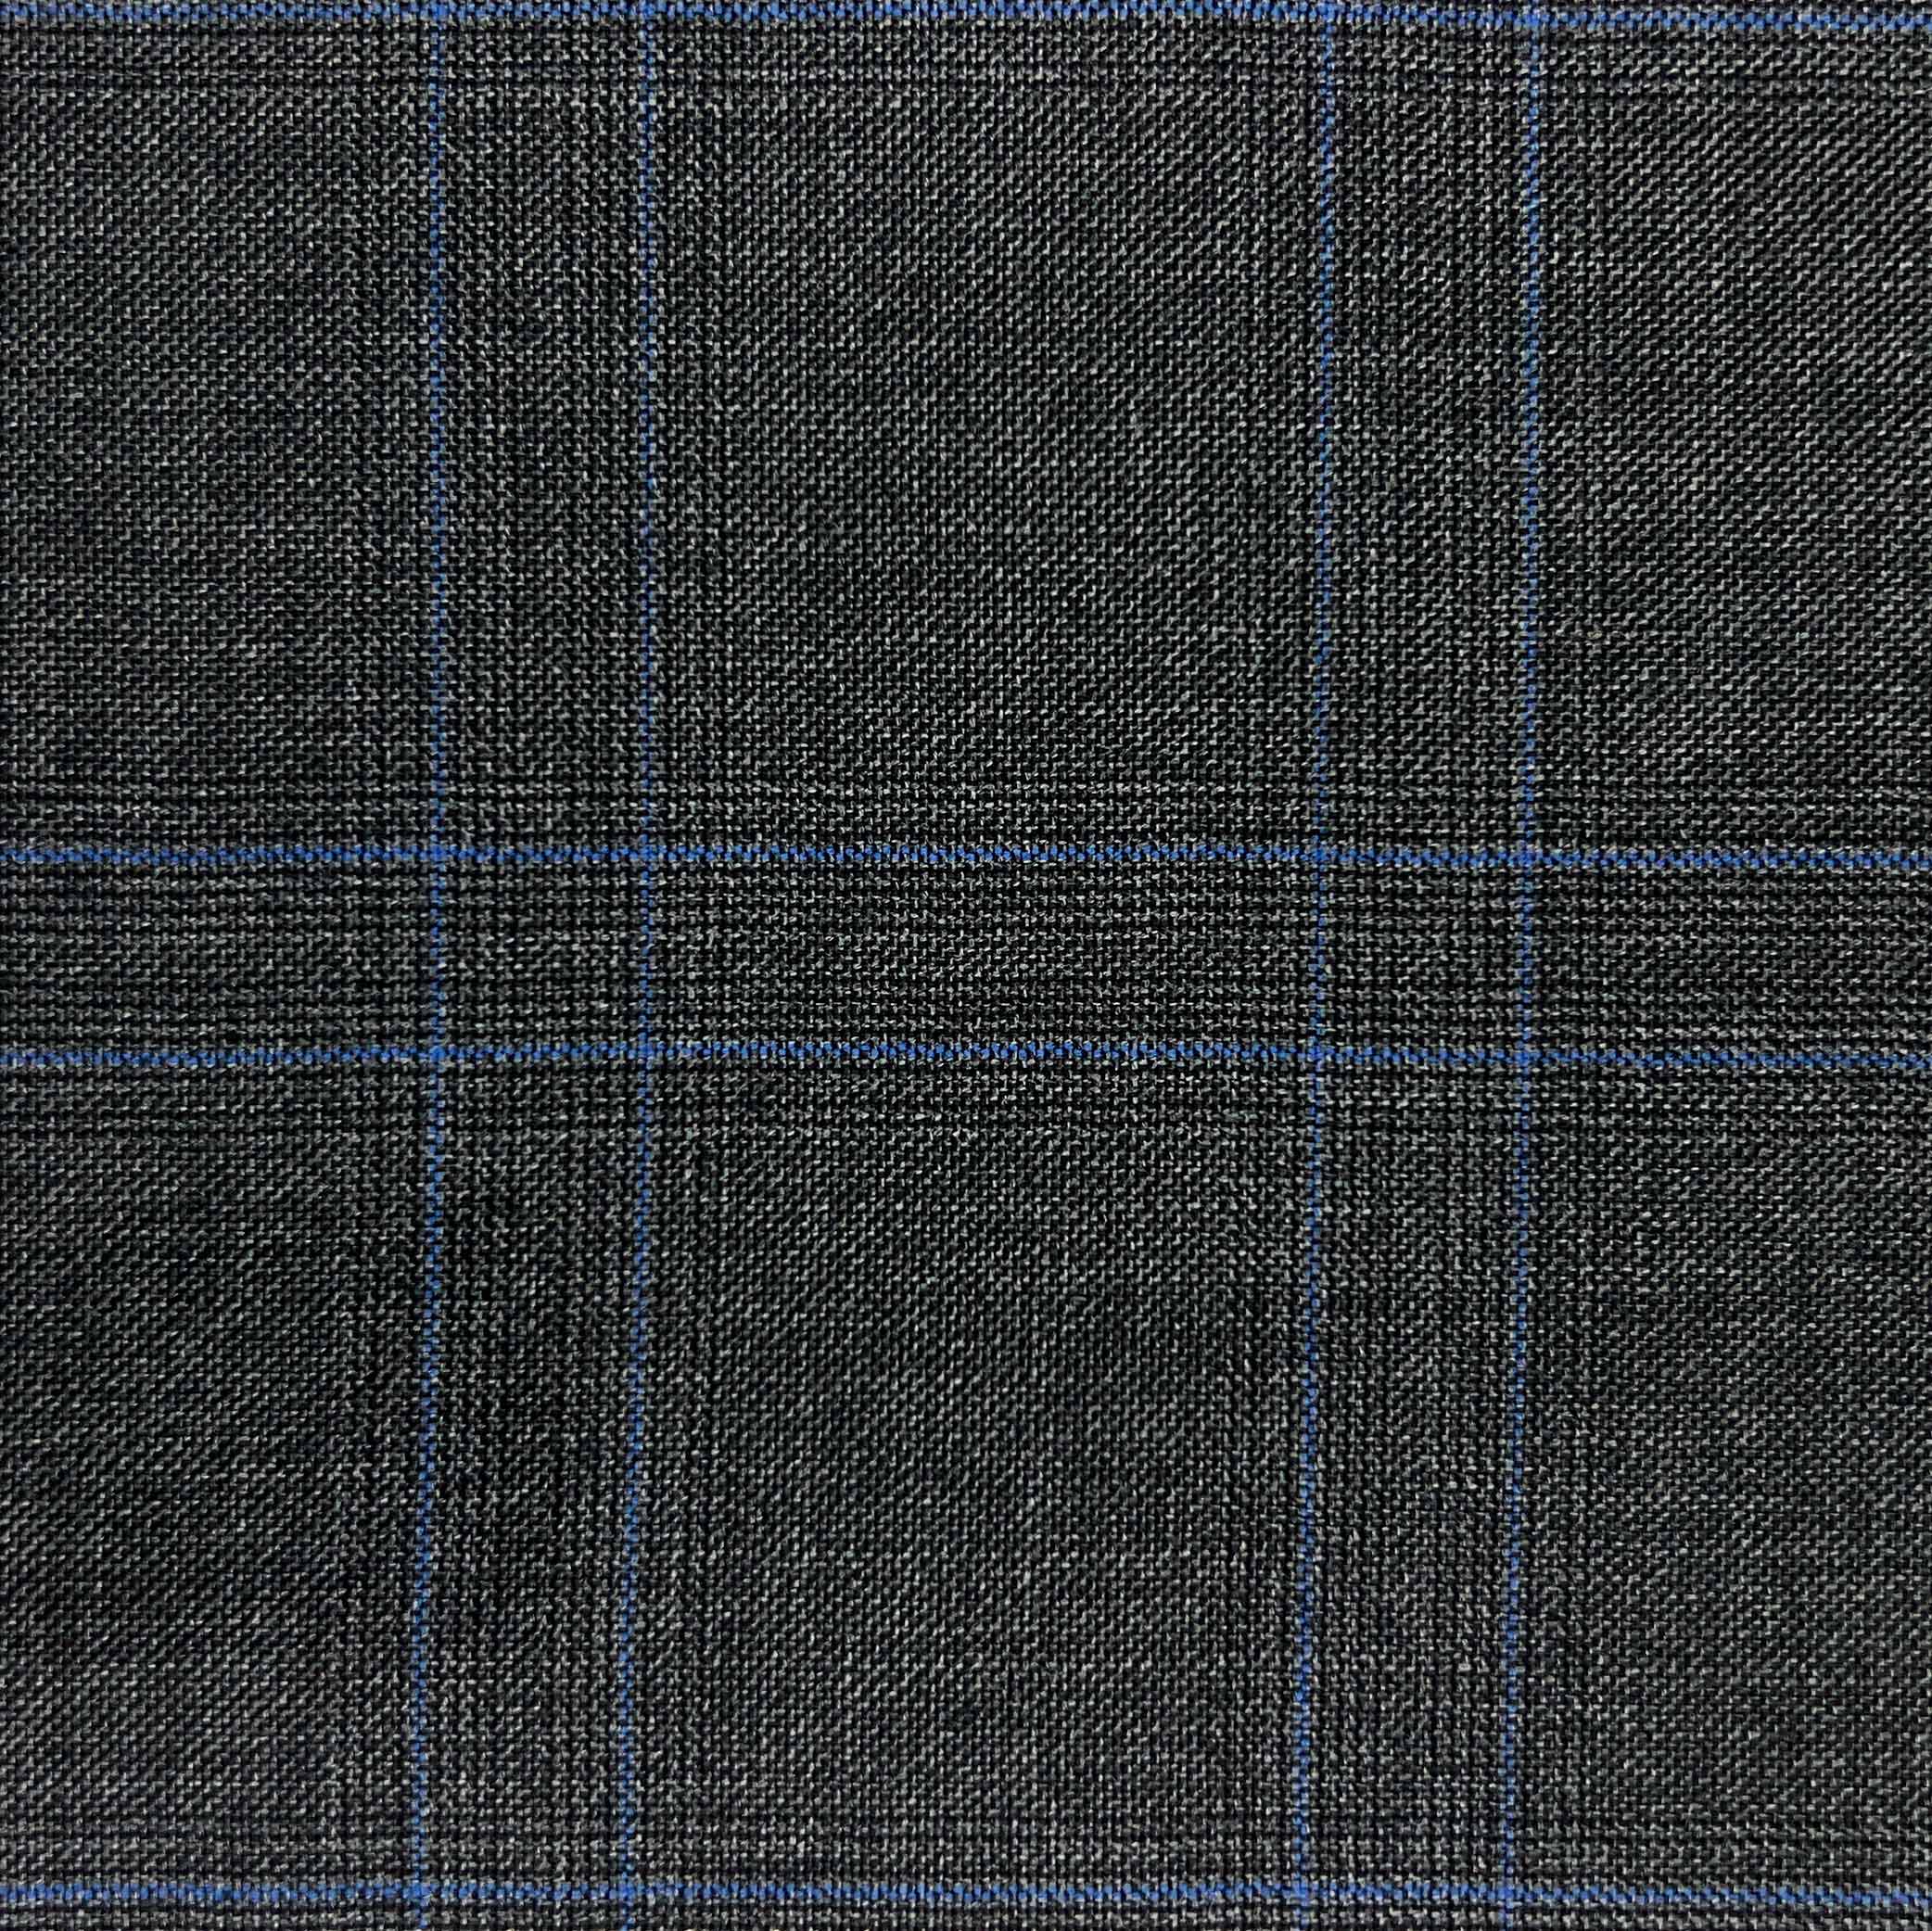 Westwood Hart Online Custom Hand Tailor Suits Sportcoats Trousers Waistcoats Overcoats Charcoal Grey With Azure Blue Plaid